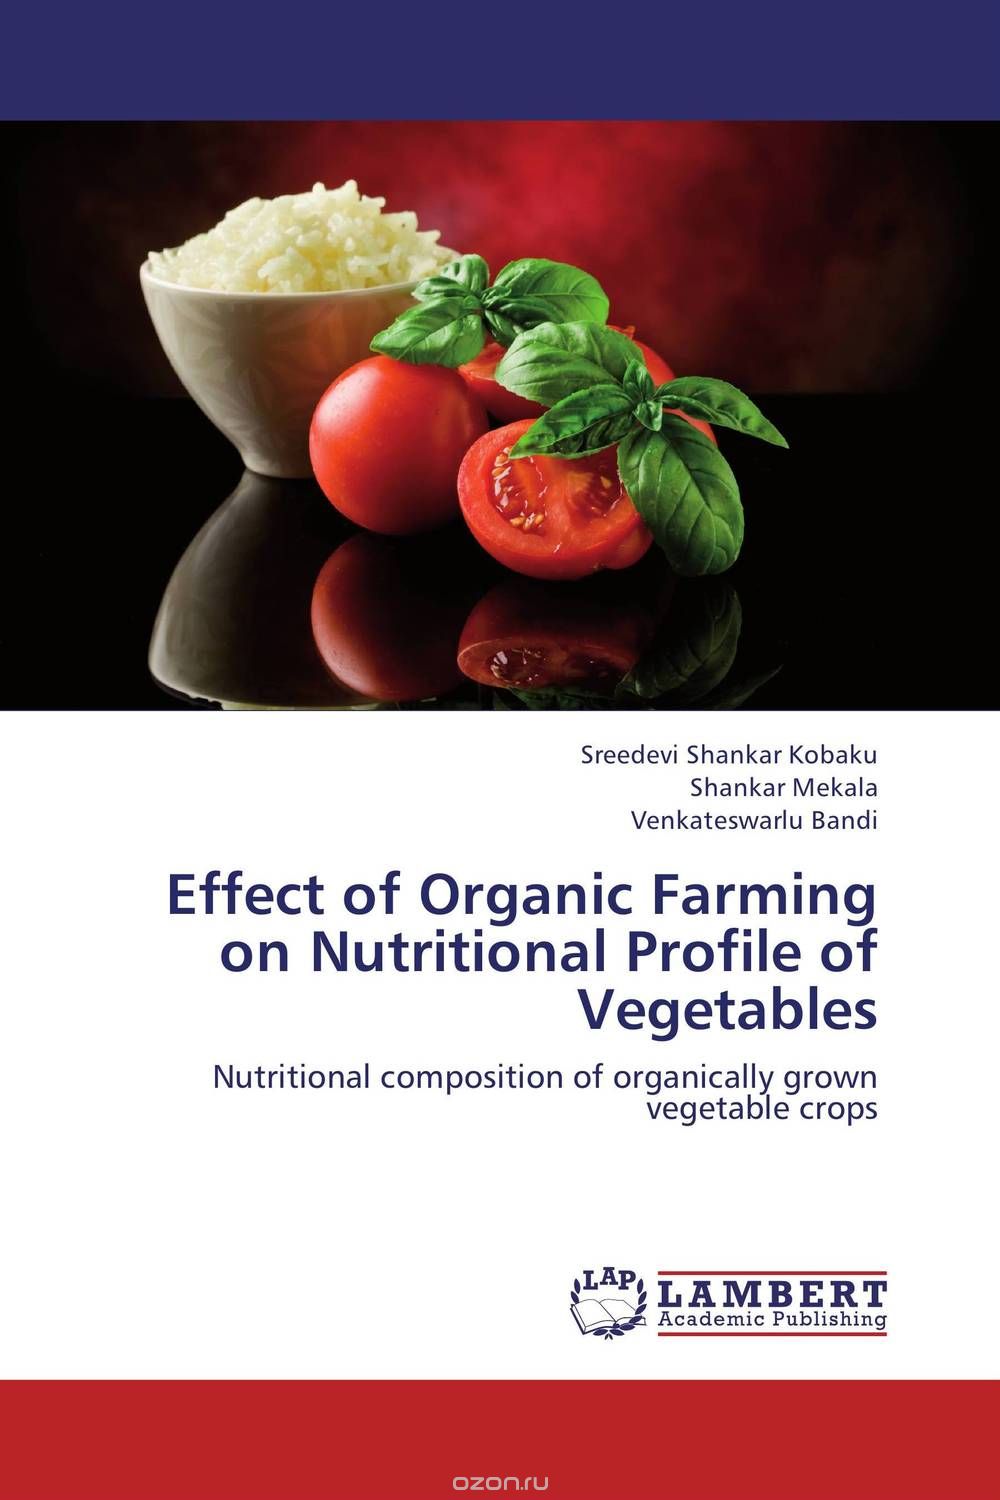 Effect of Organic Farming on Nutritional Profile of Vegetables